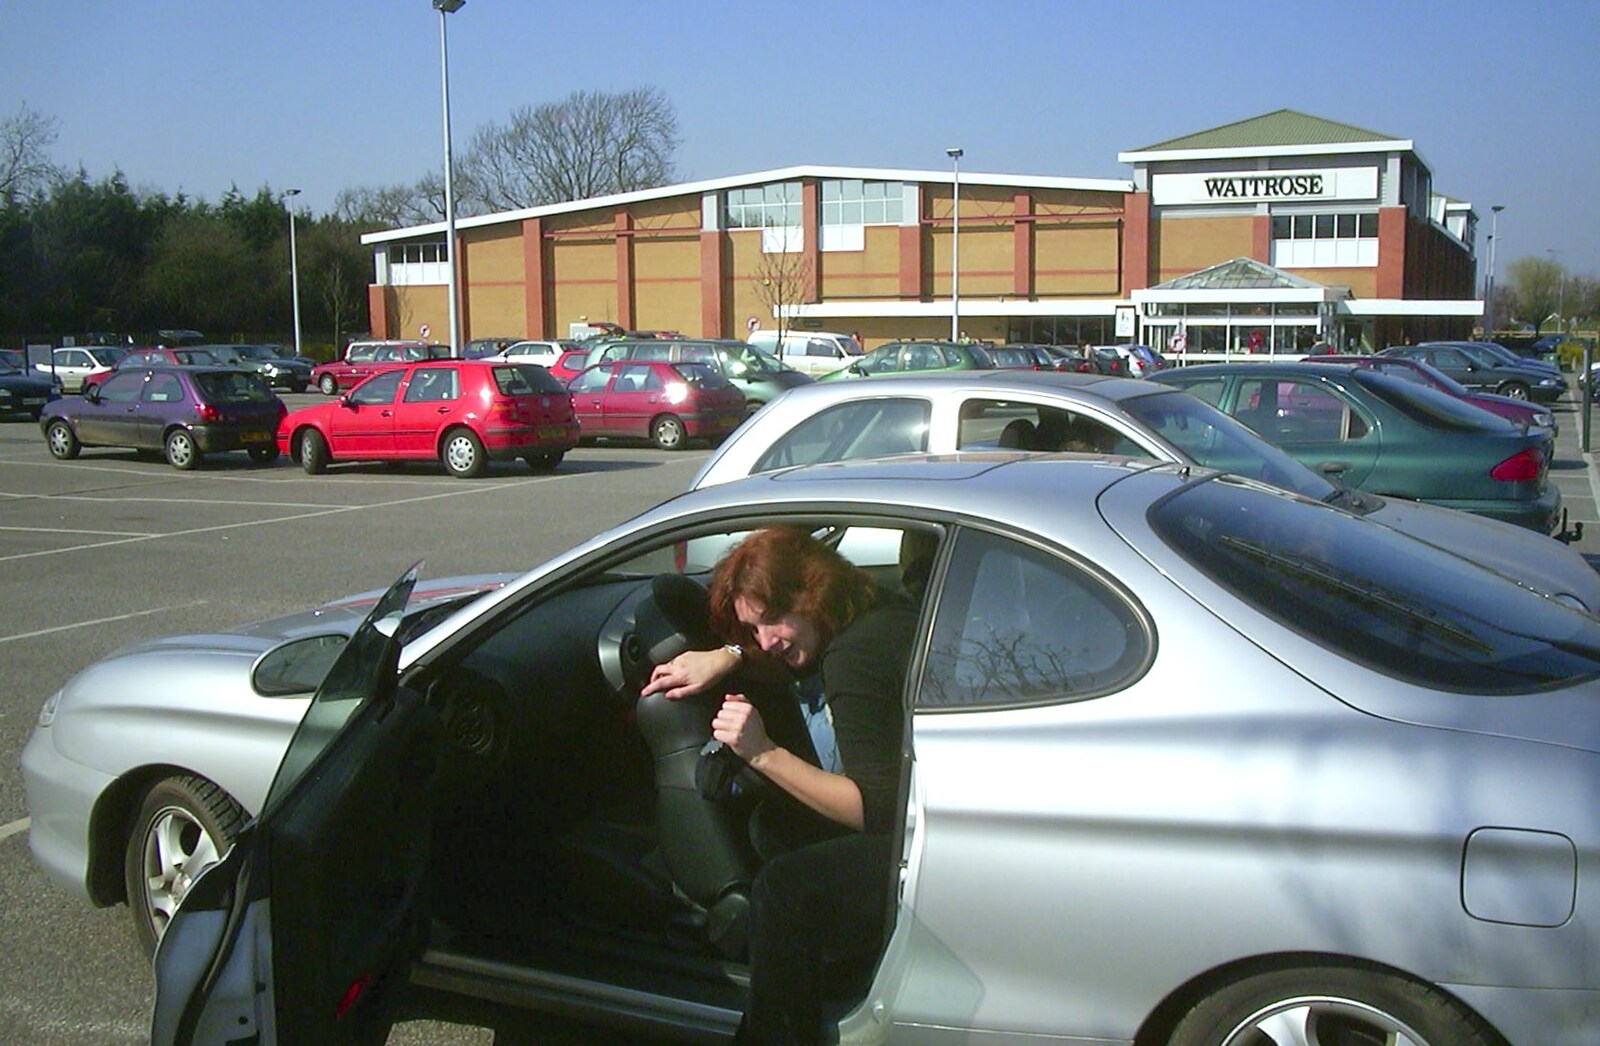 Carolyn on Sunday, Wymondham, Norfolk - 23rd March 2003: Anne squeezes out of the back of Carolyn's car